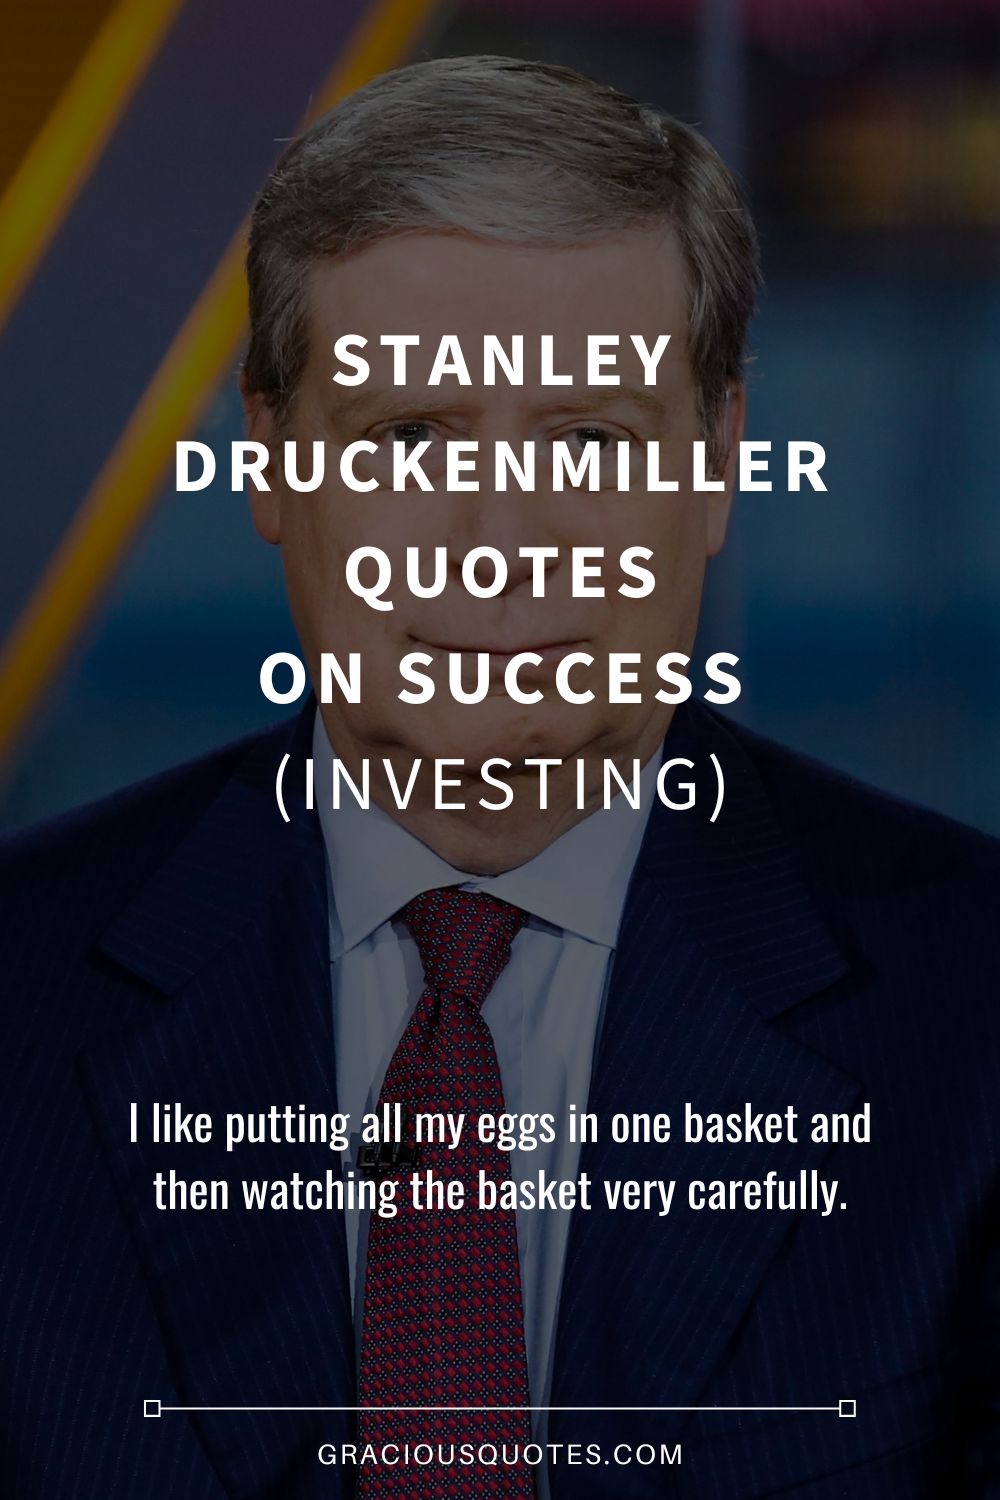 Stanley Druckenmiller Quotes on Success (INVESTING) - Gracious Quotes